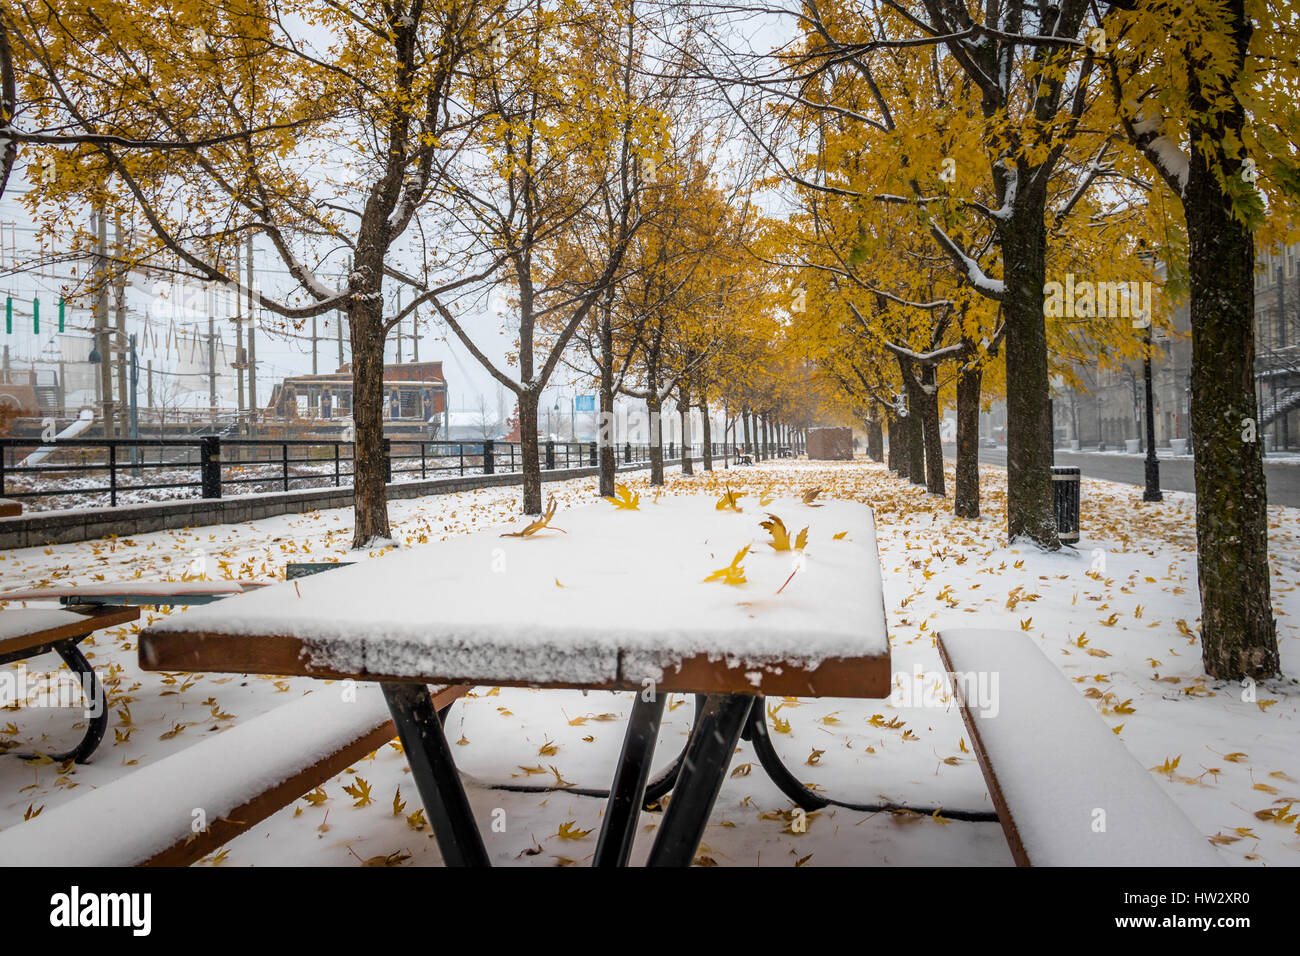 Walkway on the first snow with yellow leaves falling of trees - Montreal, Quebec, Canada Stock Photo